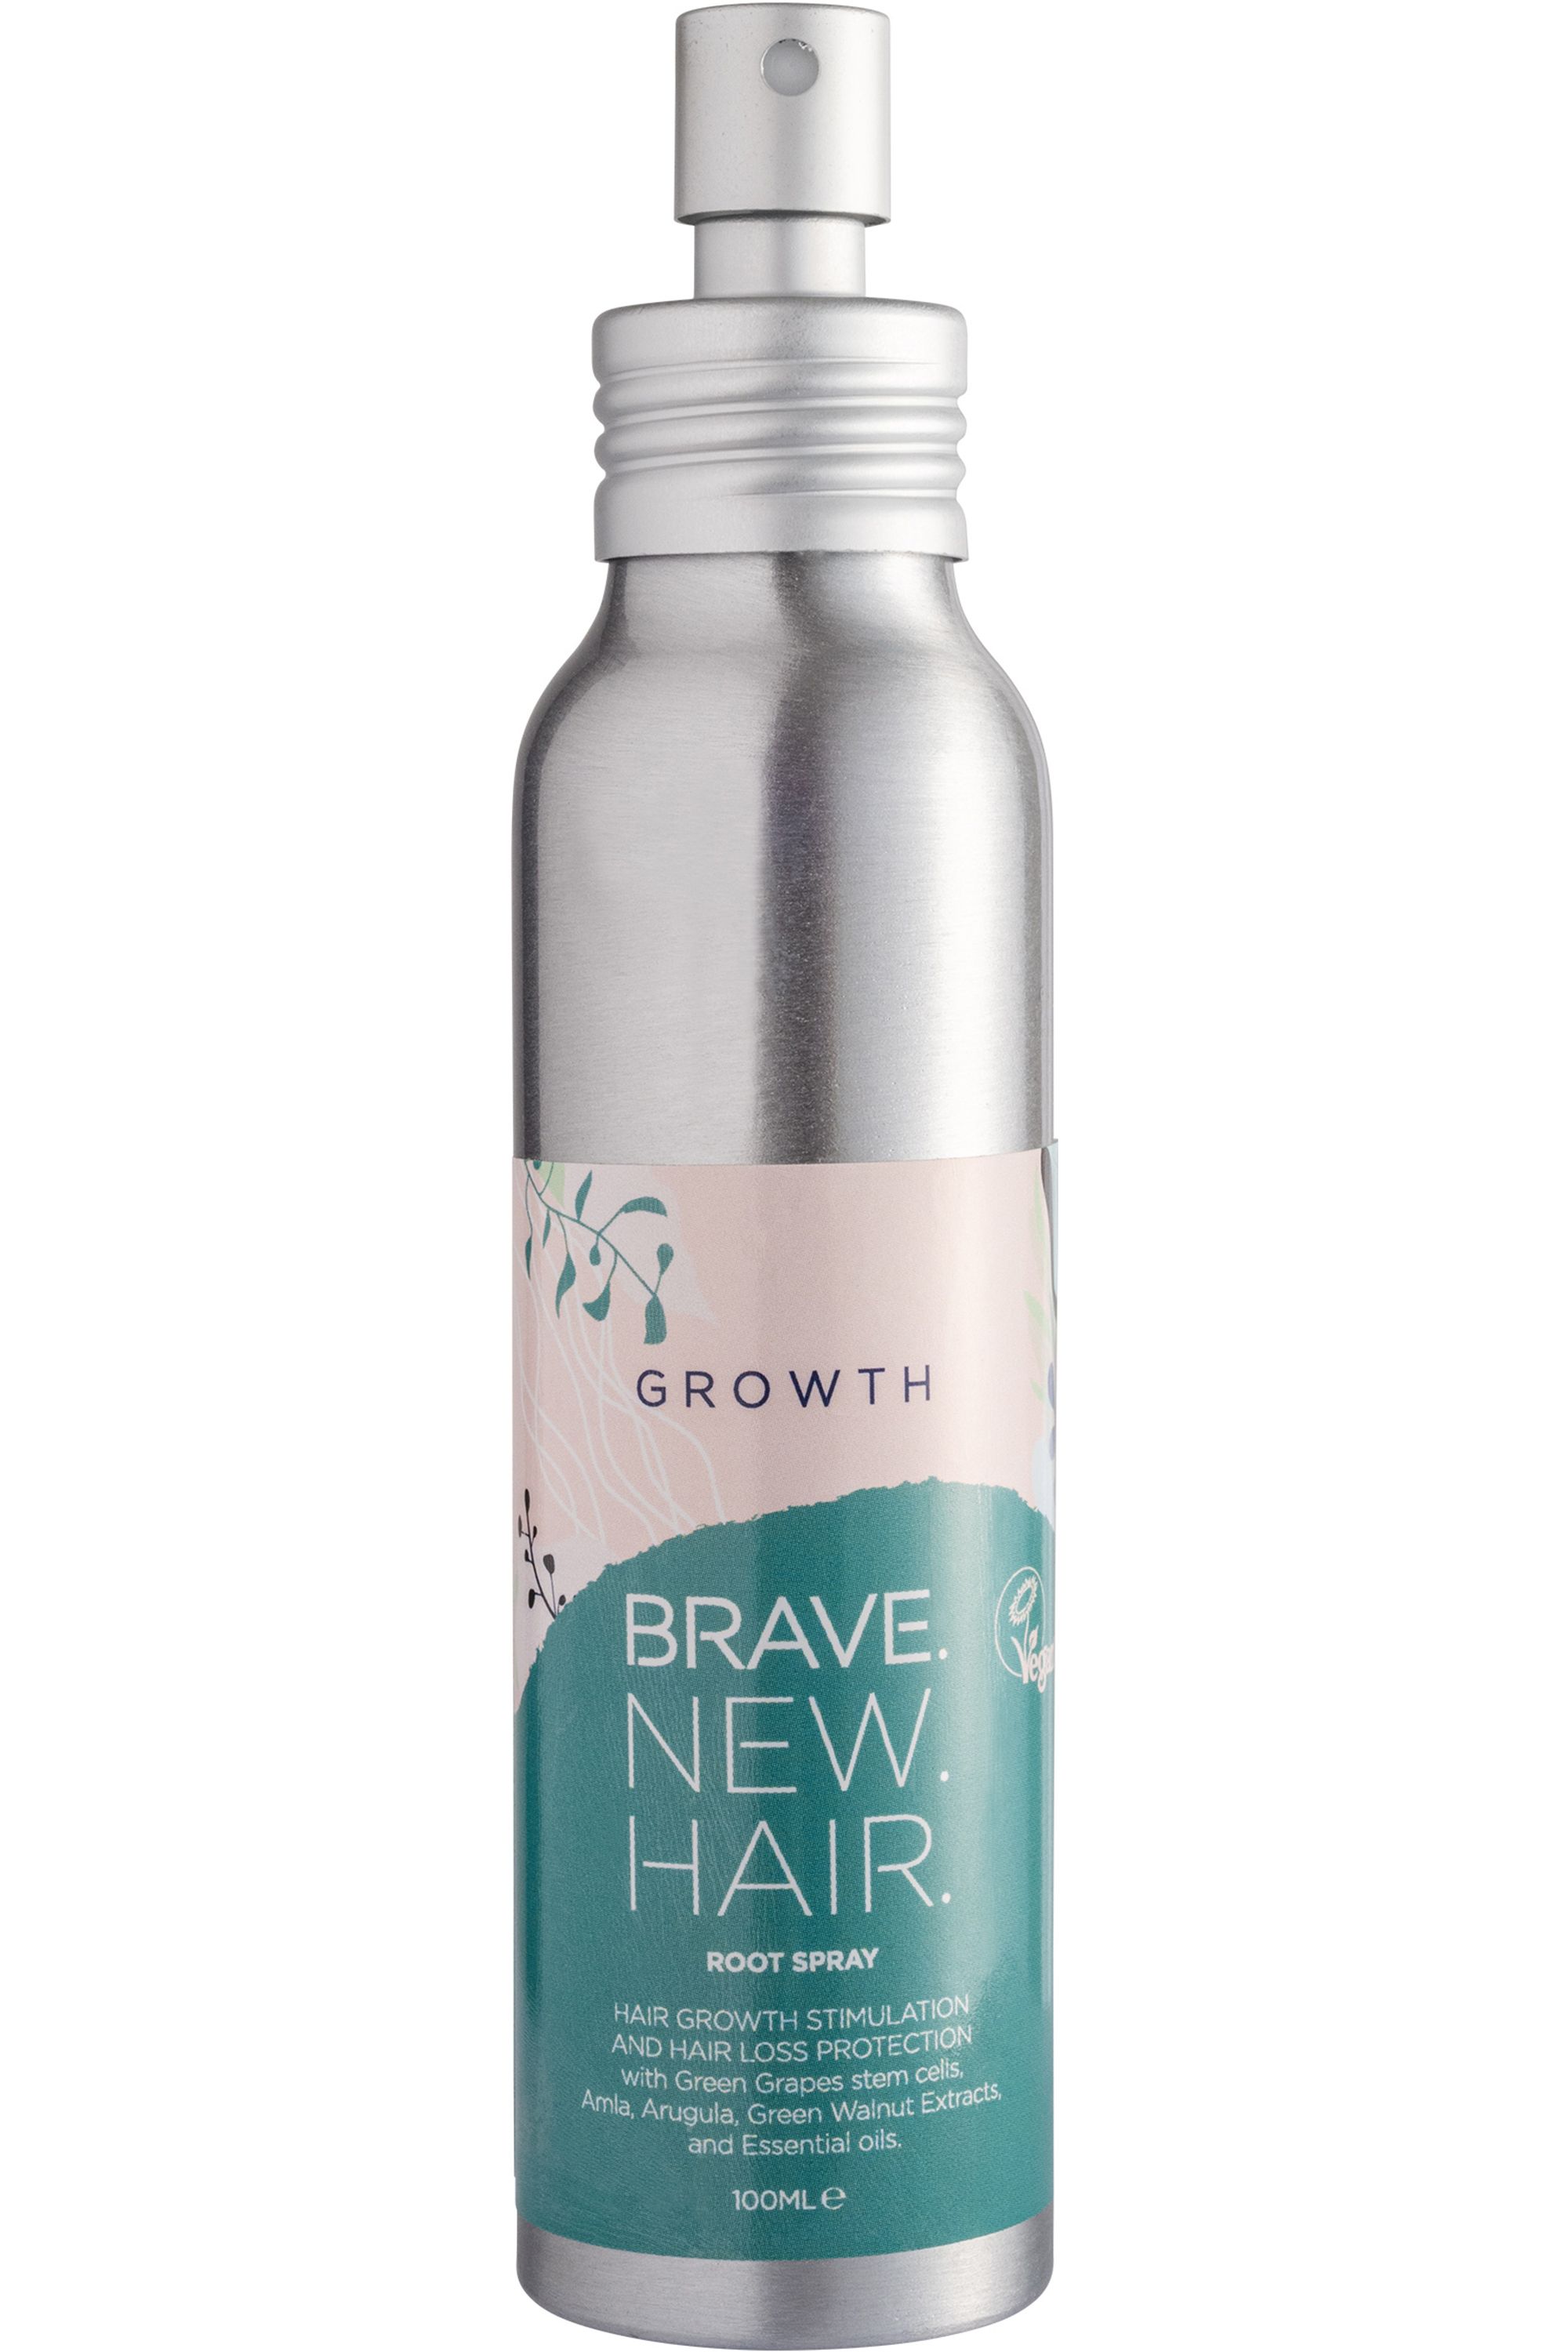 Spray cheveux: fortifiant & embellisseur - Be Loves Nature